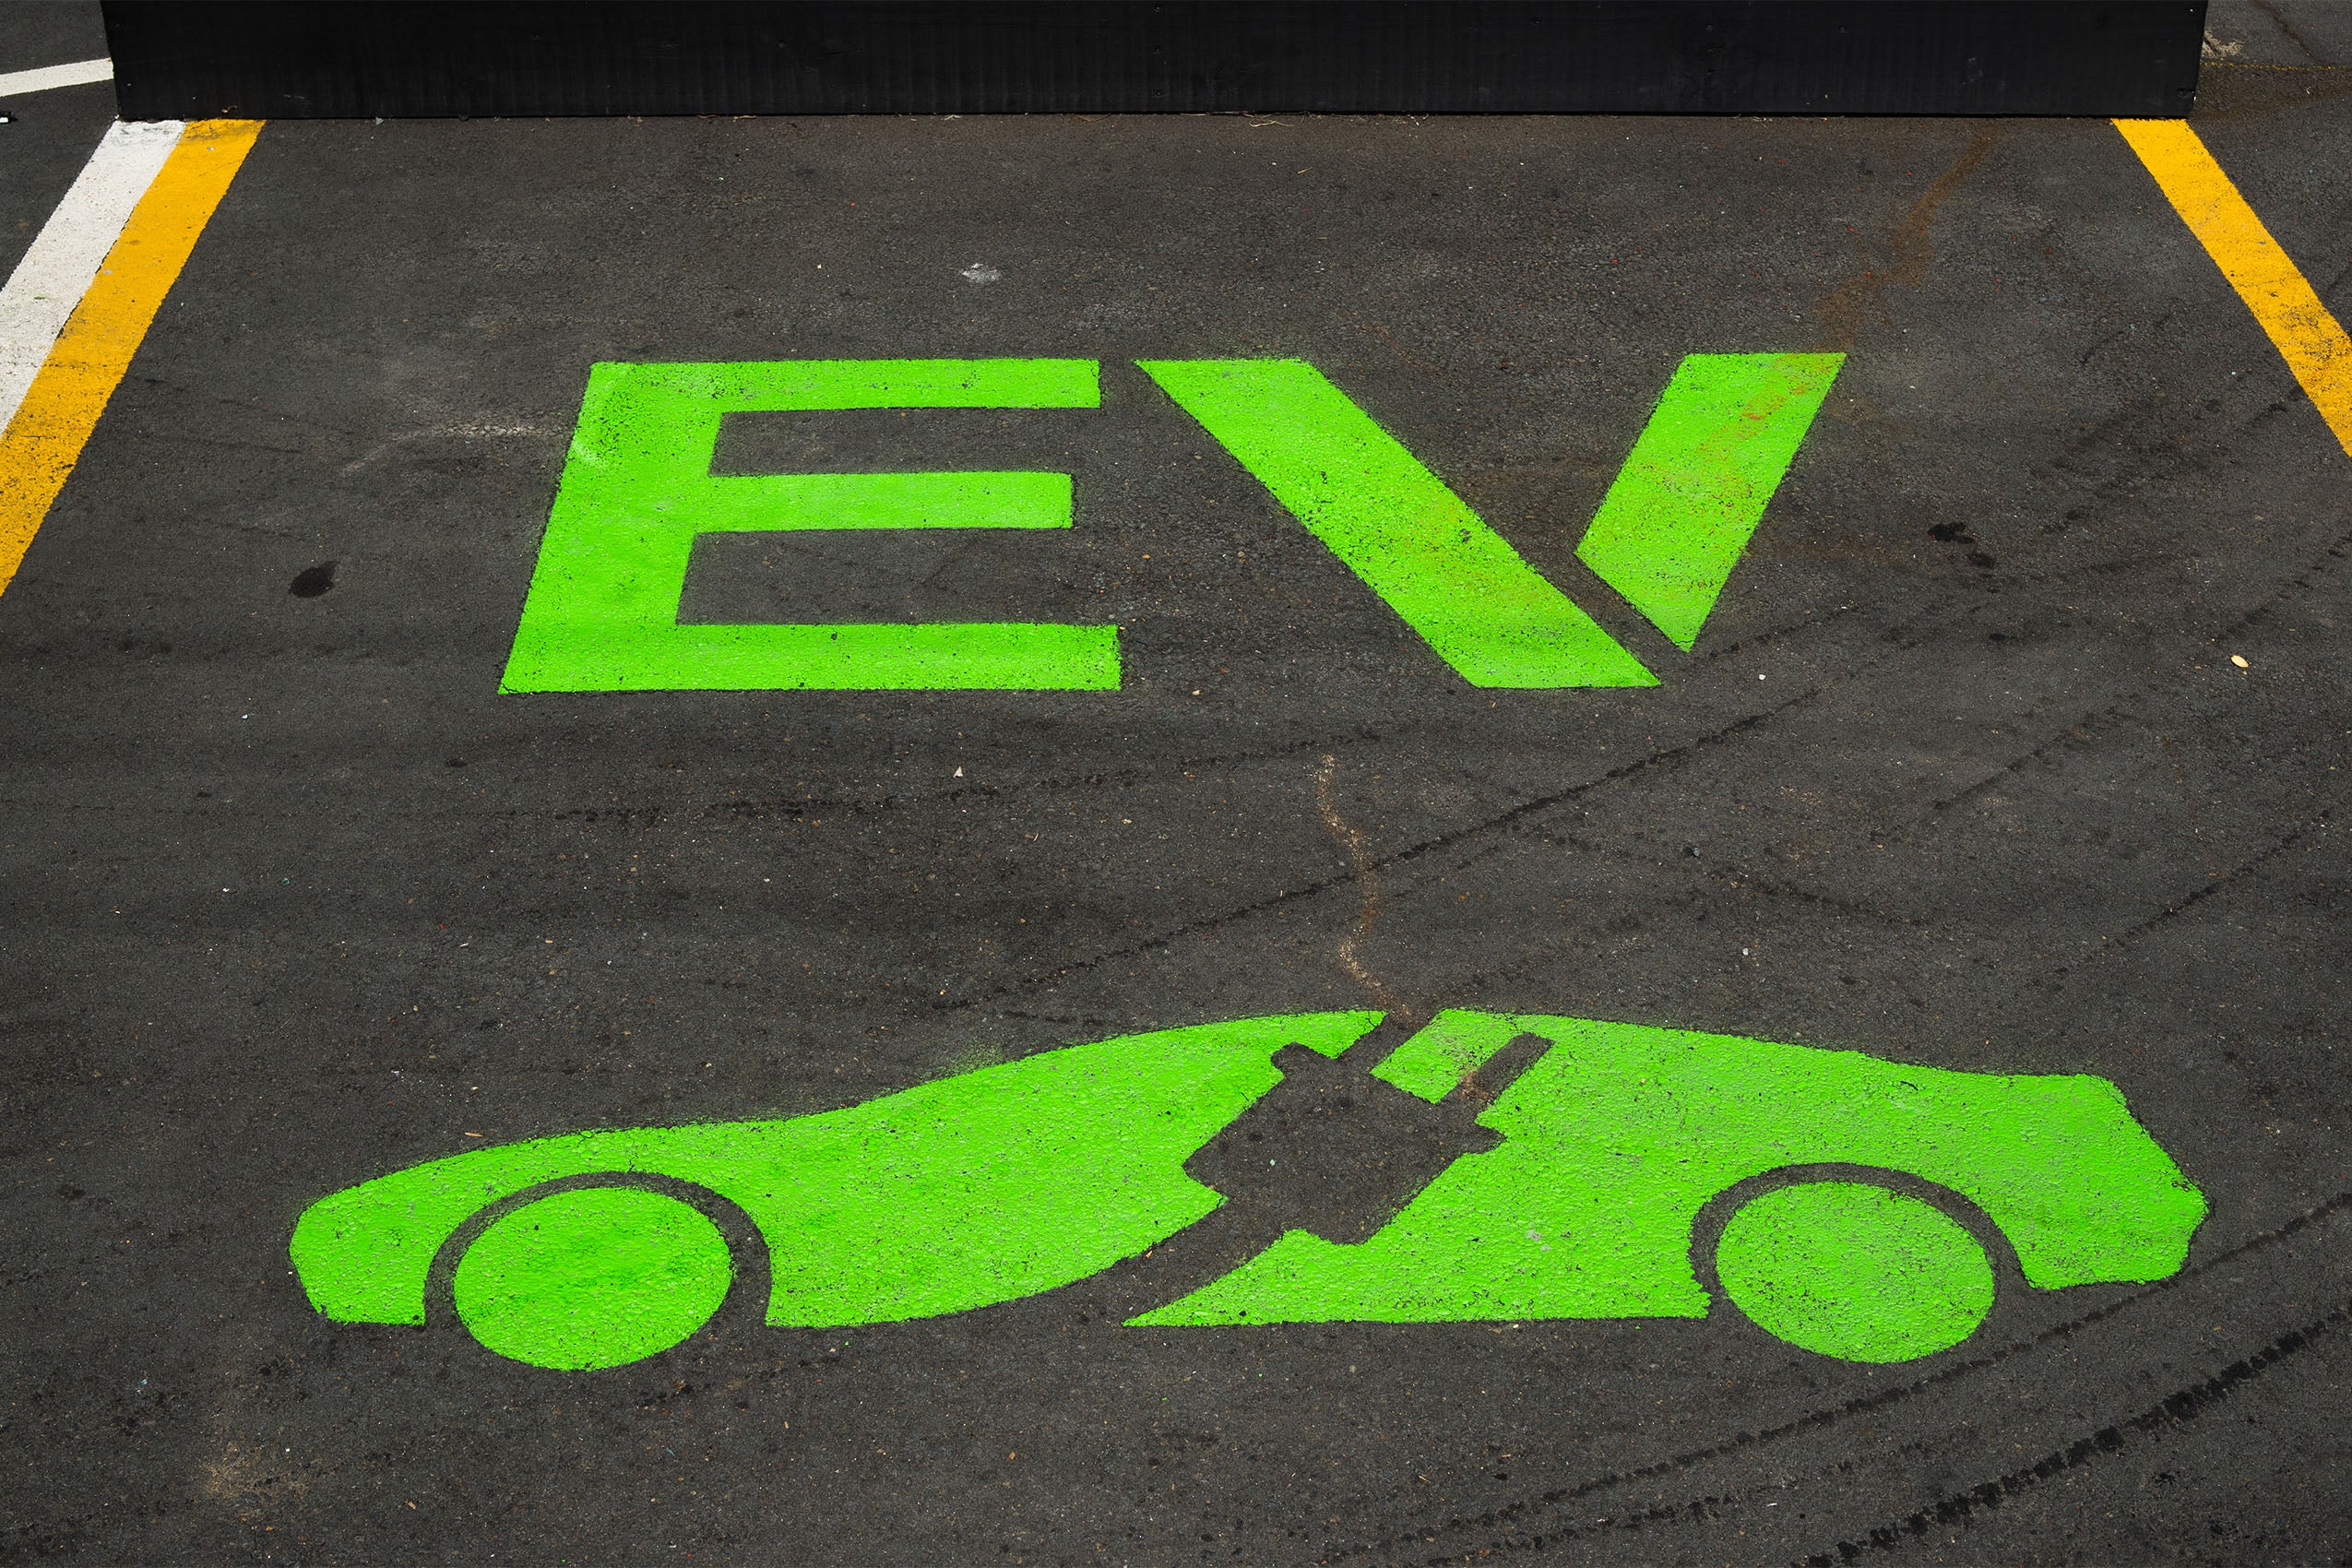 Electric vehicle parking space marked with a green stencil of the letters 